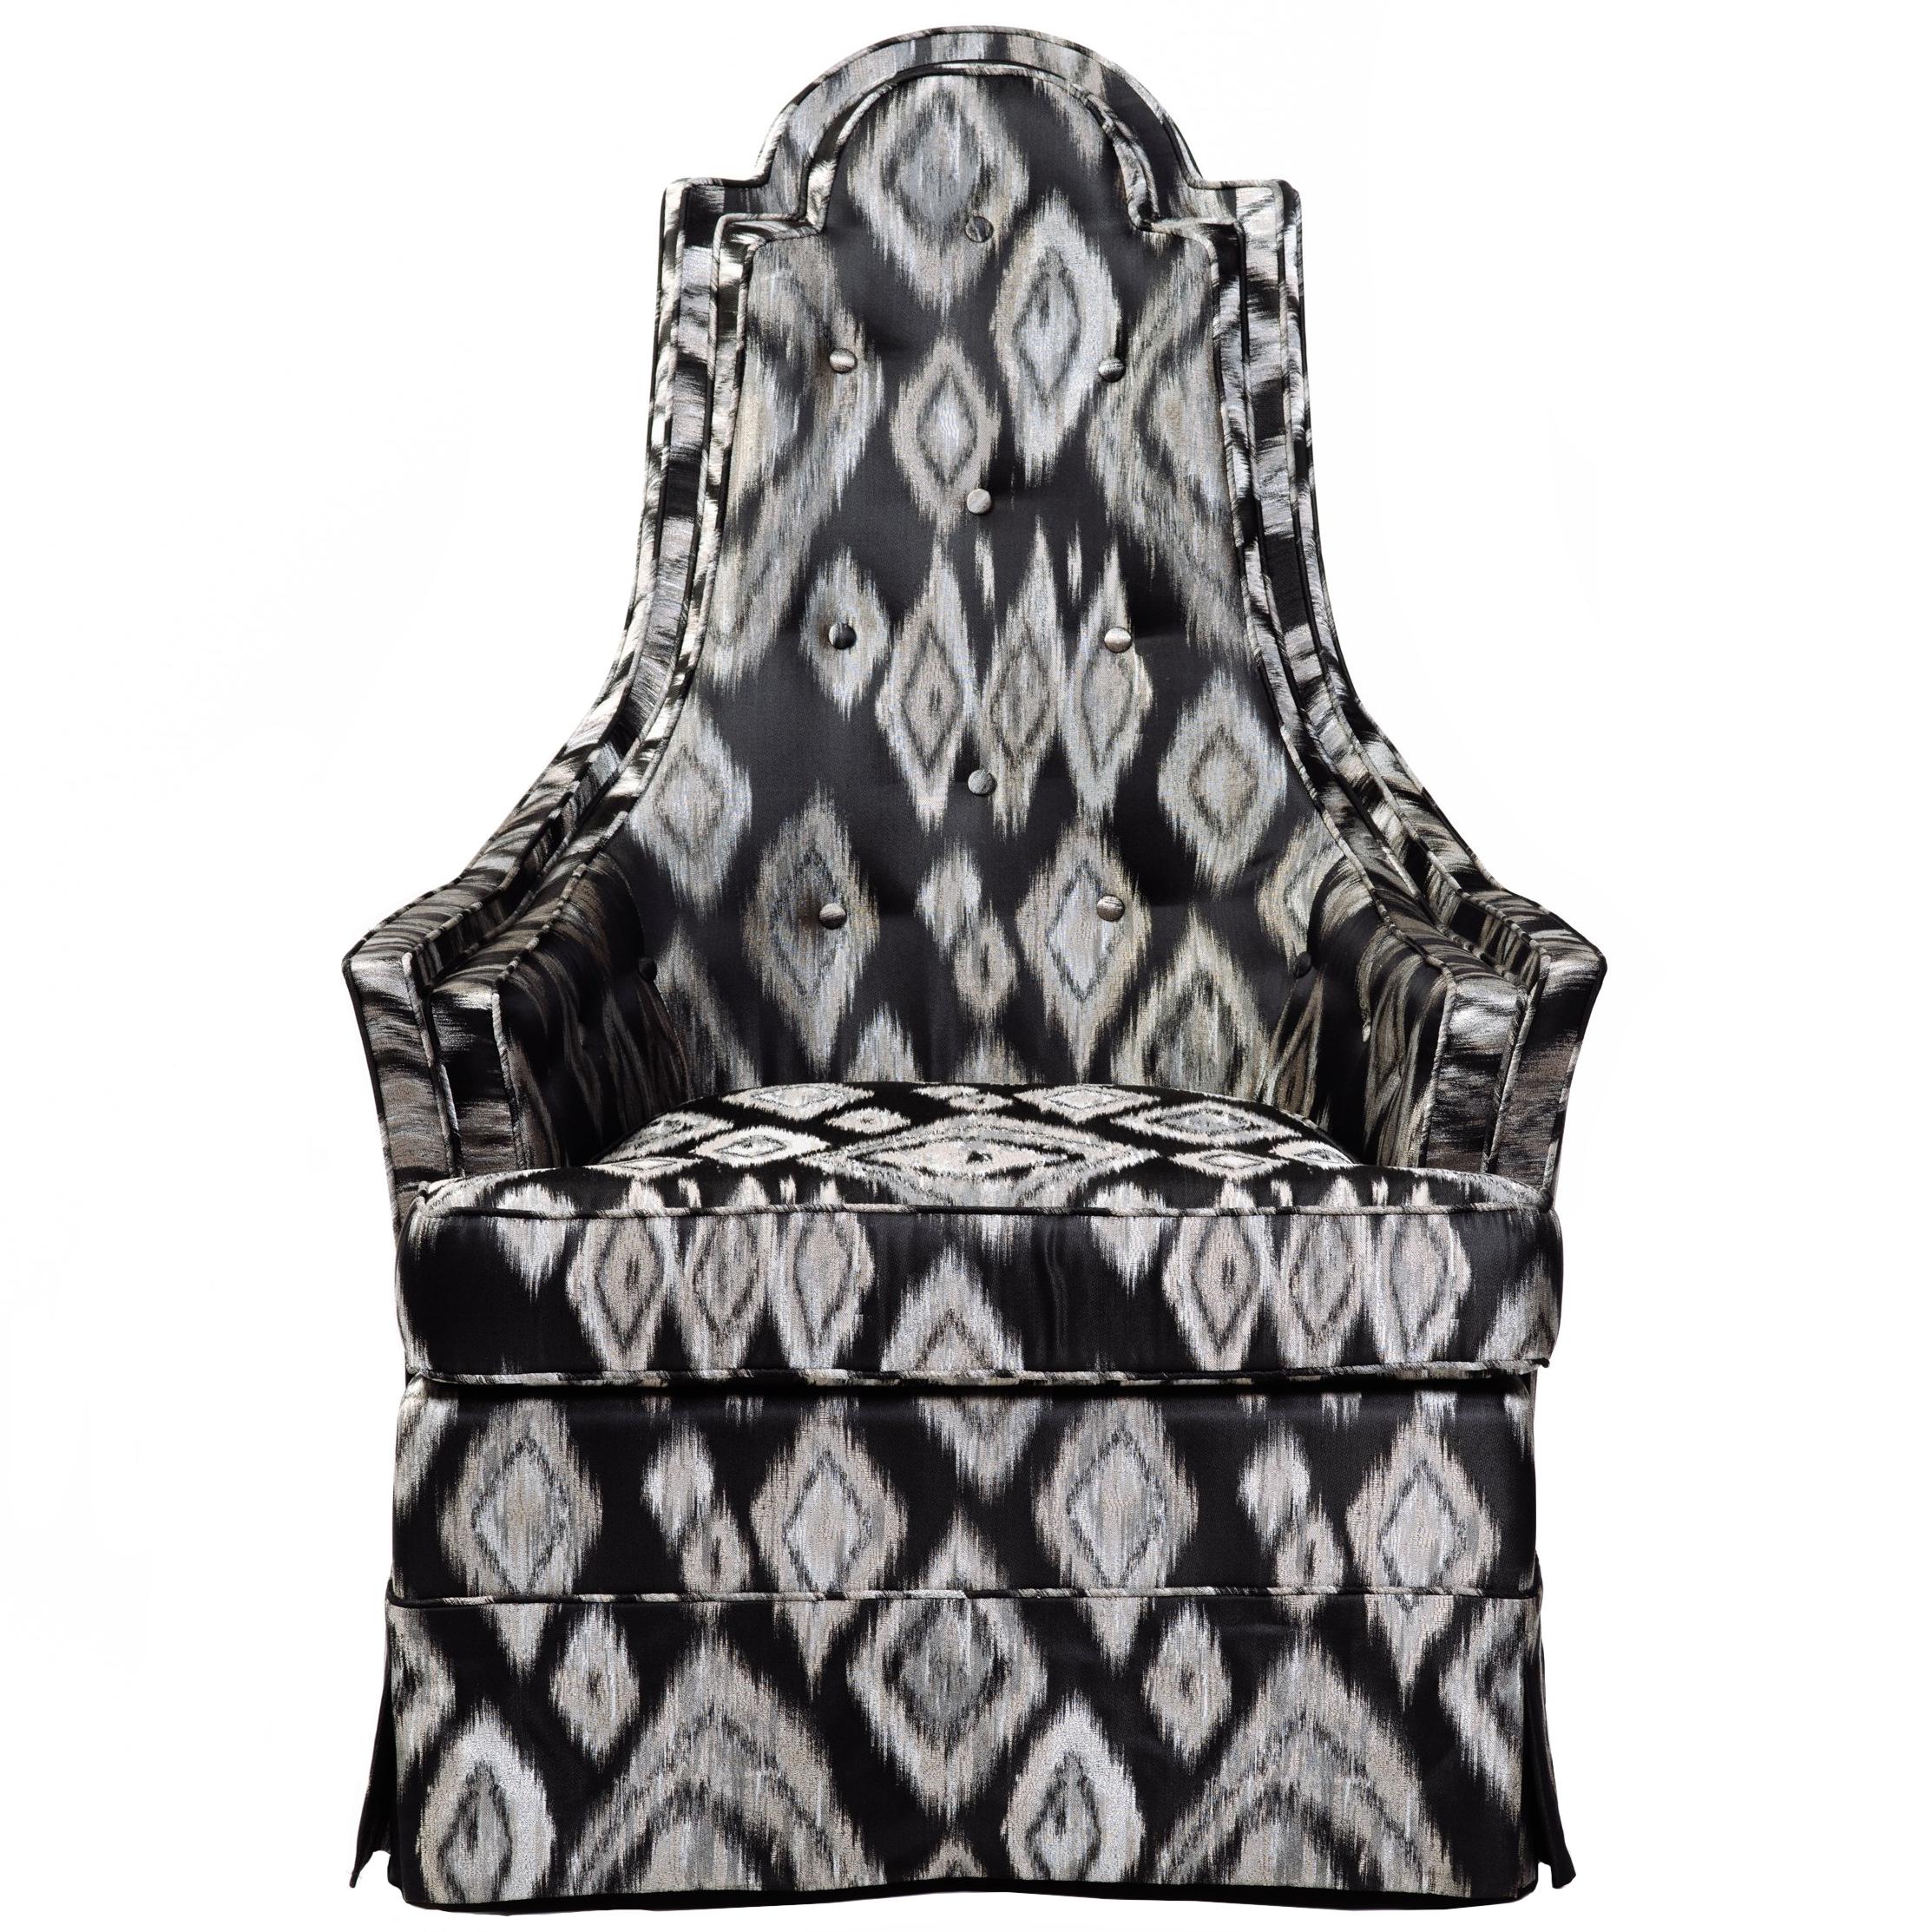 Mid-Century Modern Skirted High Back Chair in Black and Silver Ikat. c. 1960's For Sale 4